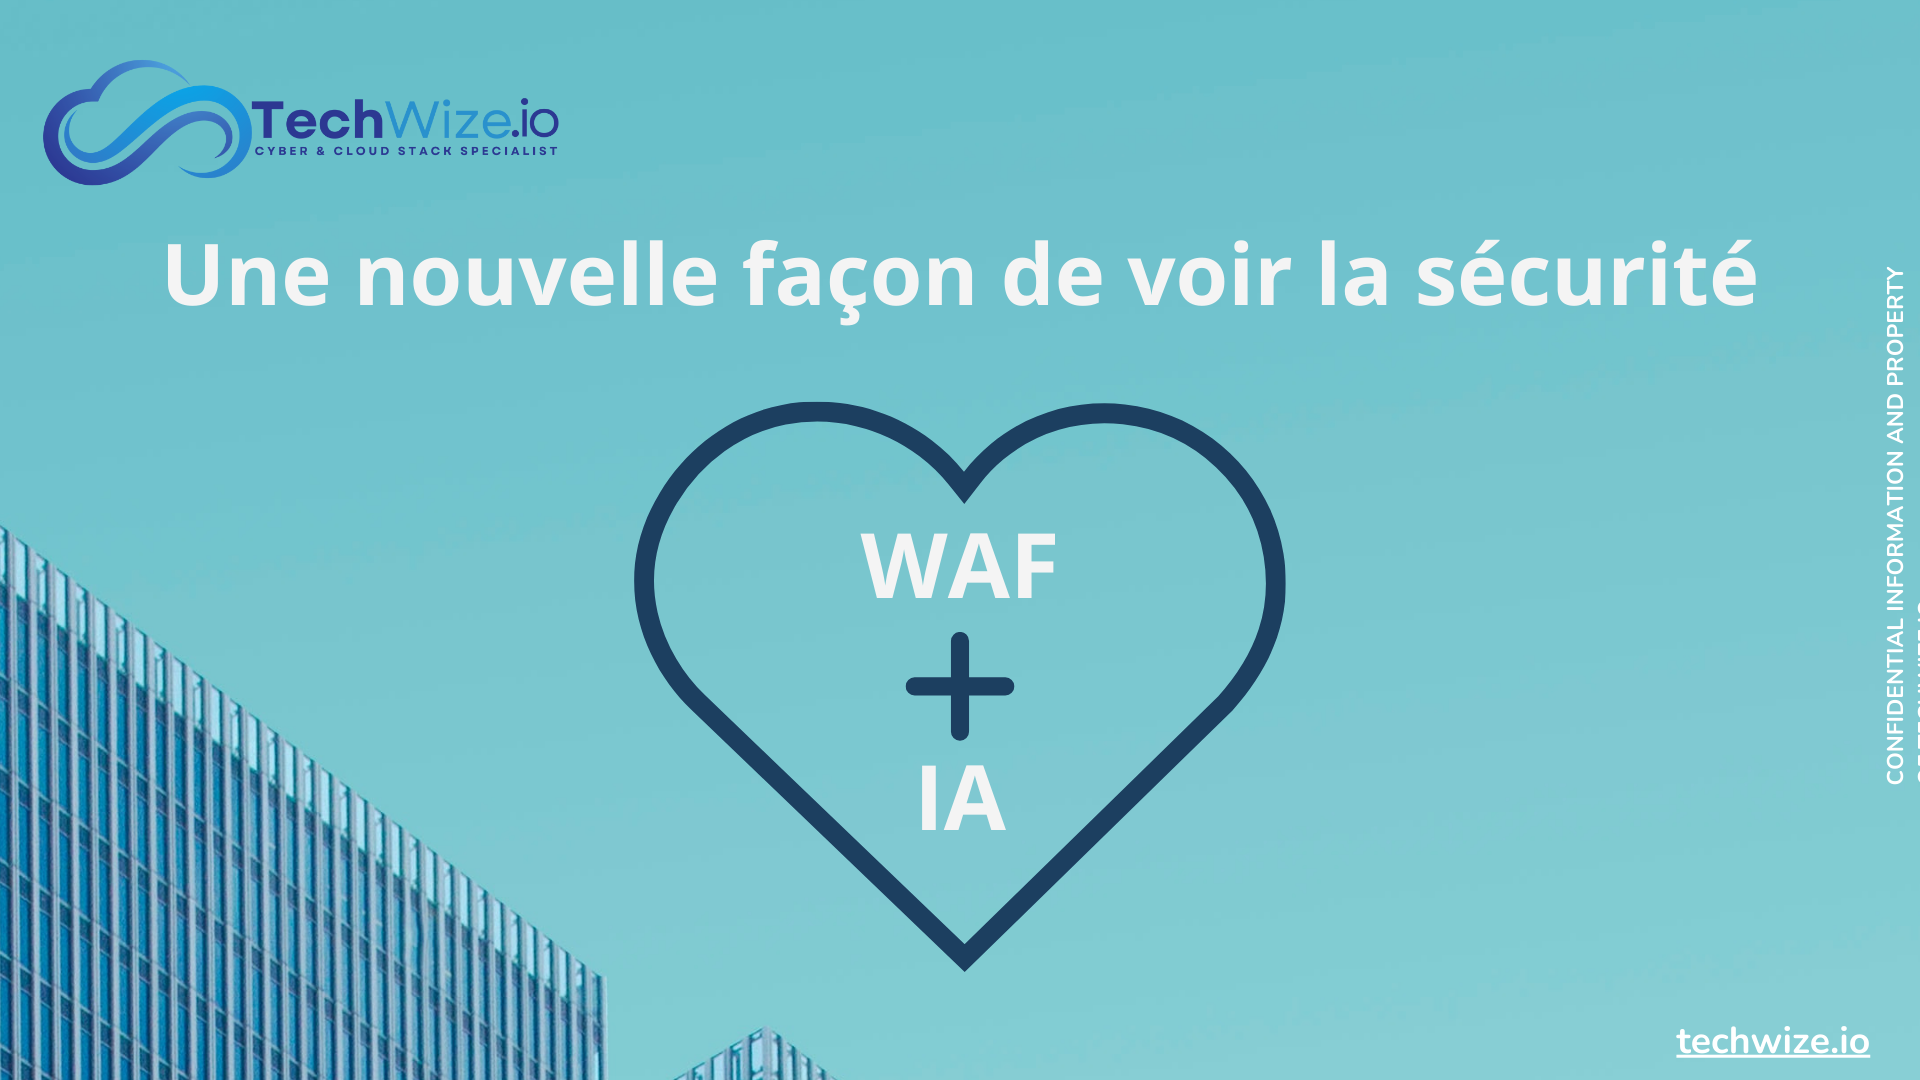 WAF and AI: An indestructible duo at your service